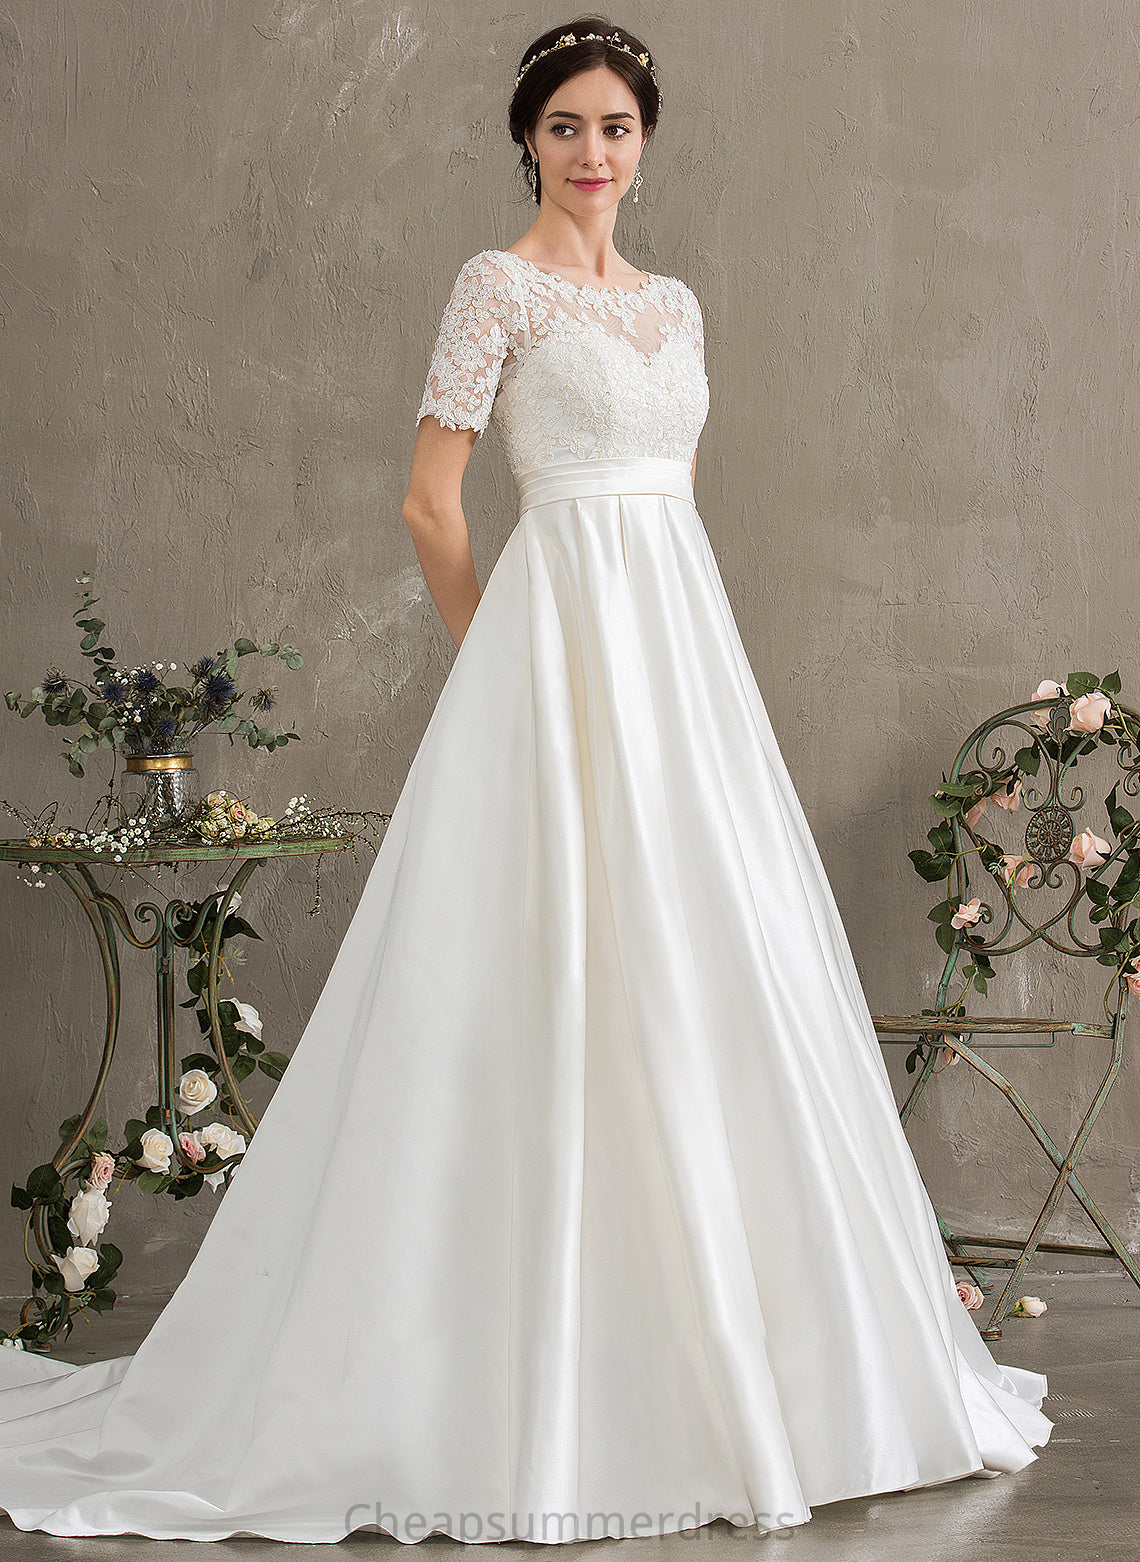 Court Sequins Train Dress Kimberly Wedding With Scoop Satin Wedding Dresses Pockets Ball-Gown/Princess Neck Beading